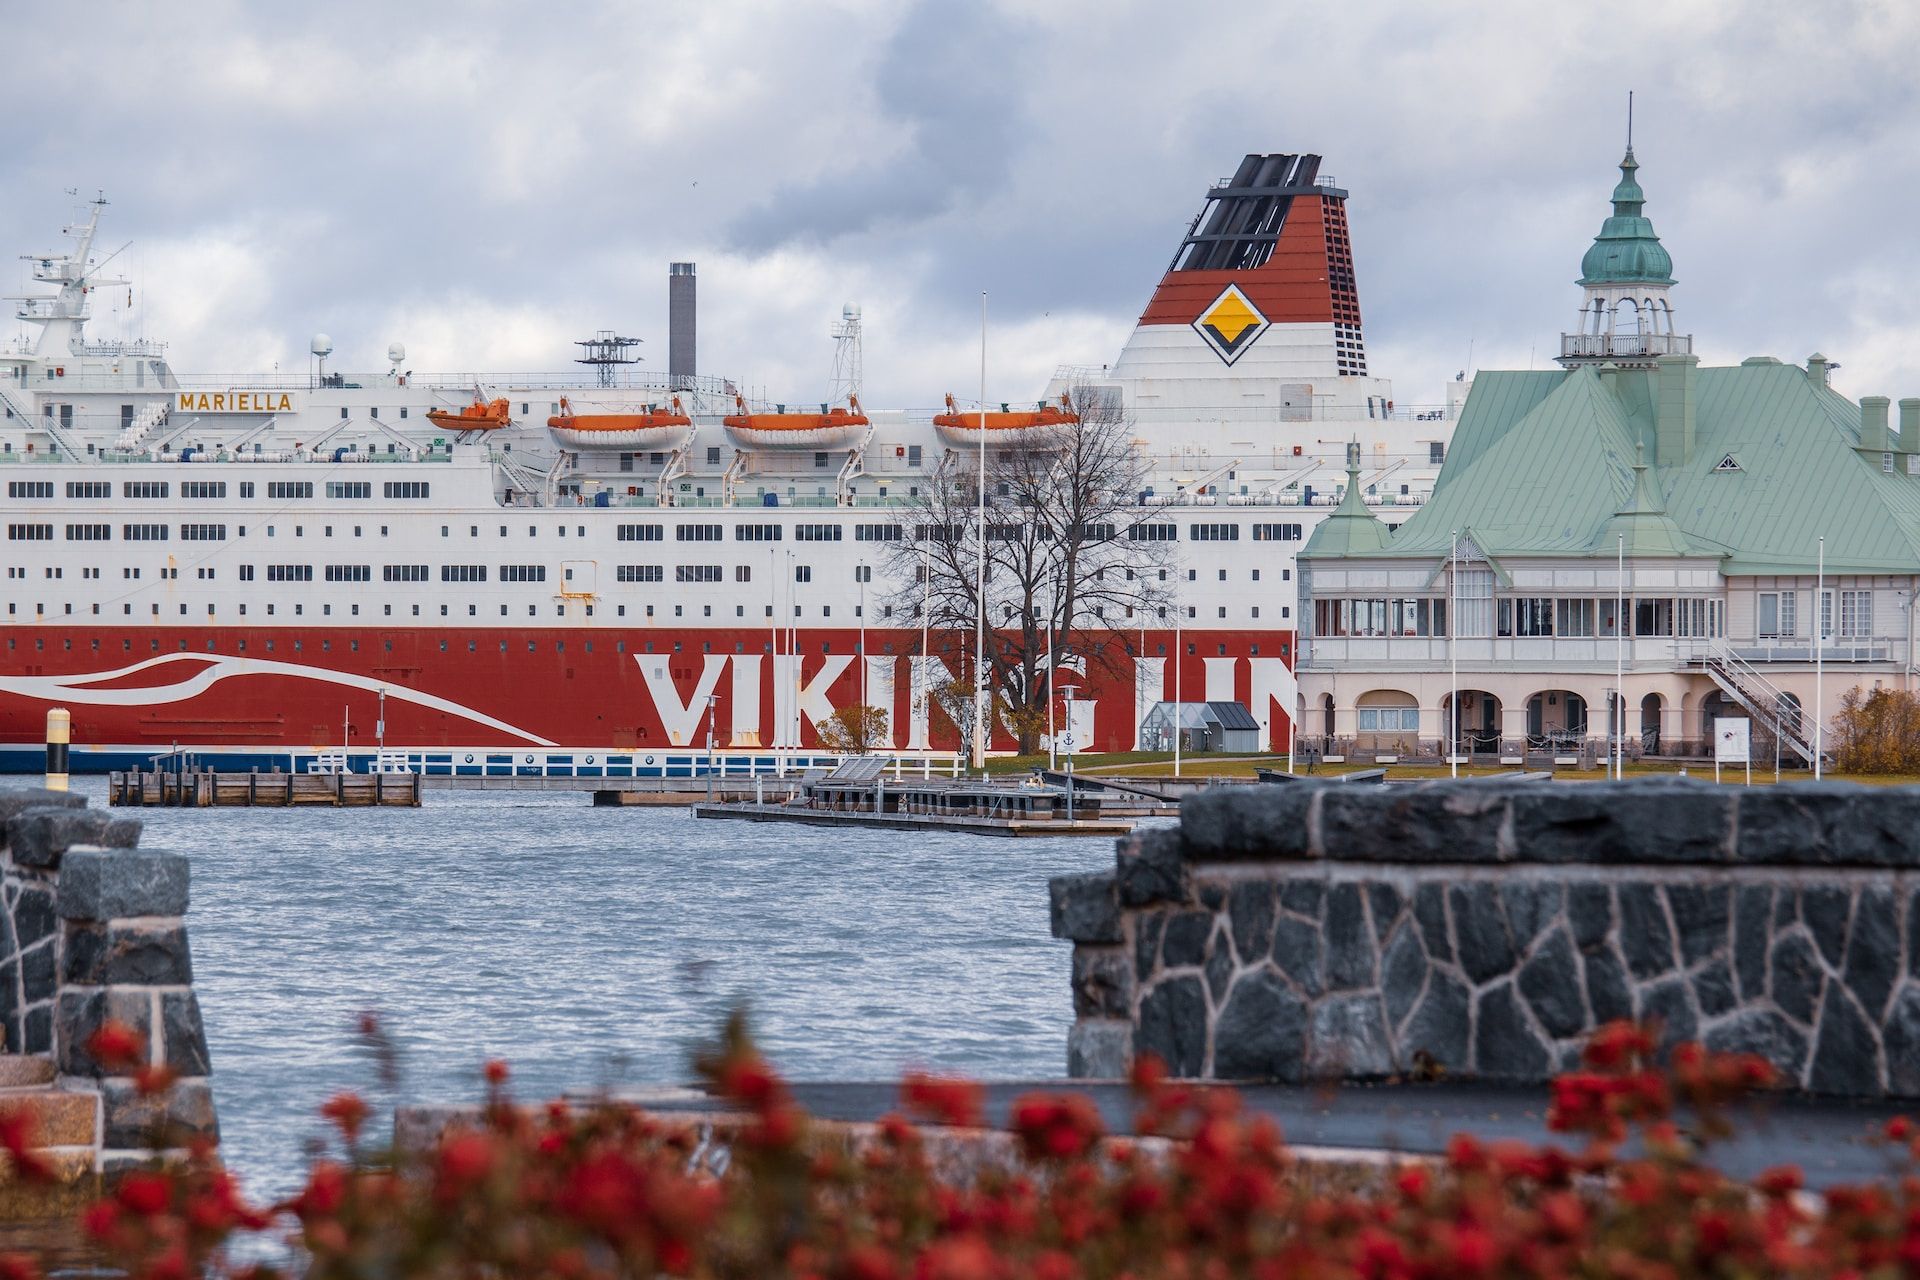 Viking Cruise Ship docked at South Harbour